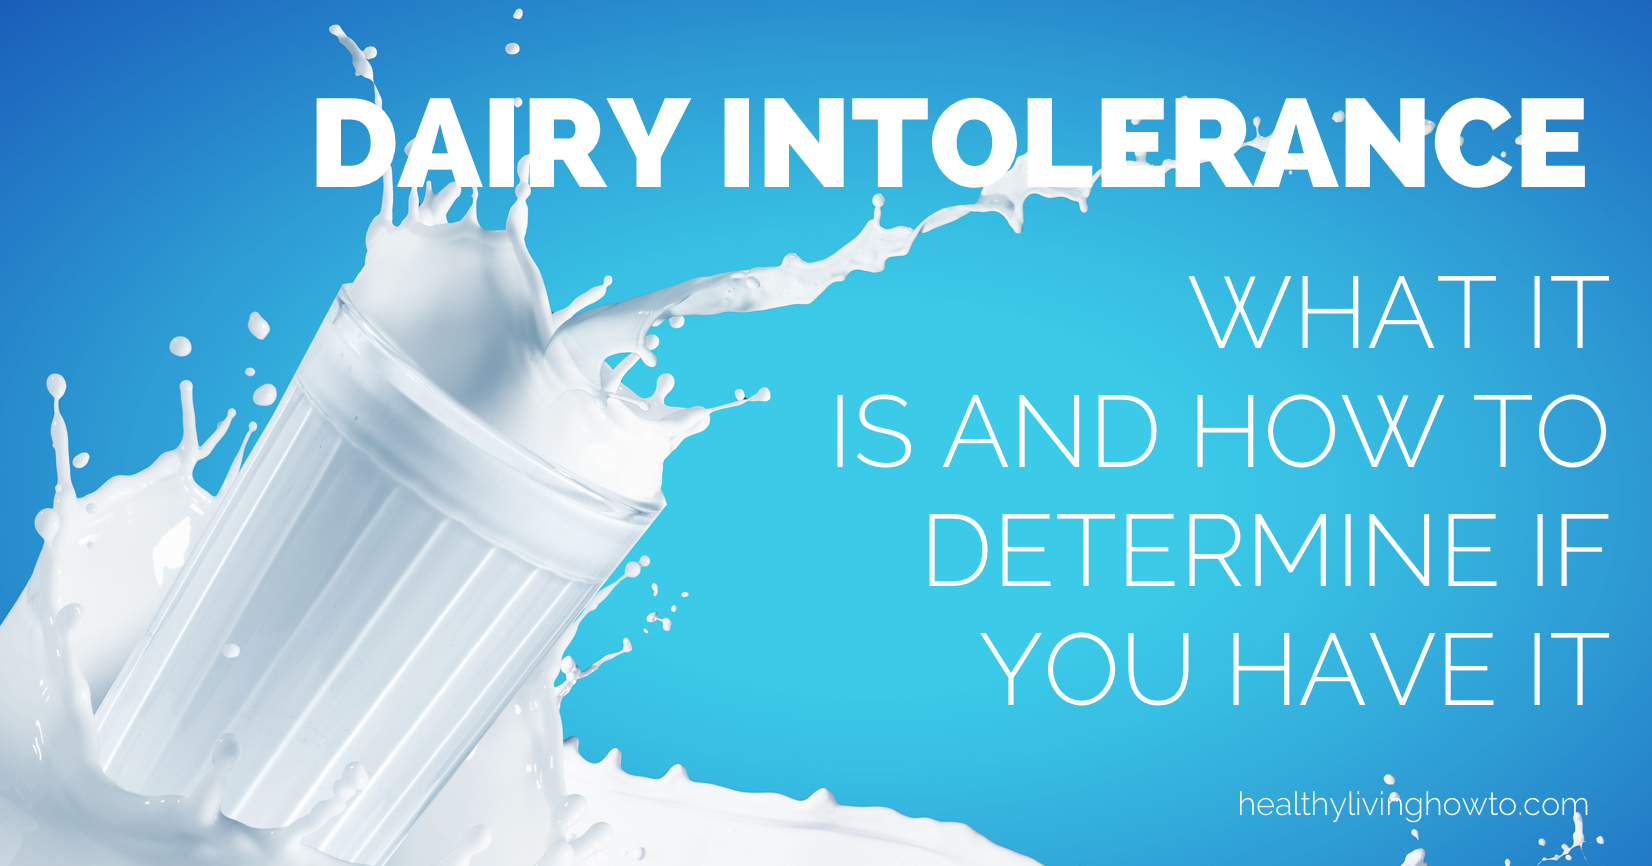 Dairy Intolerance What It Is And How To Determine If You Have It | healthylivinghowto.com